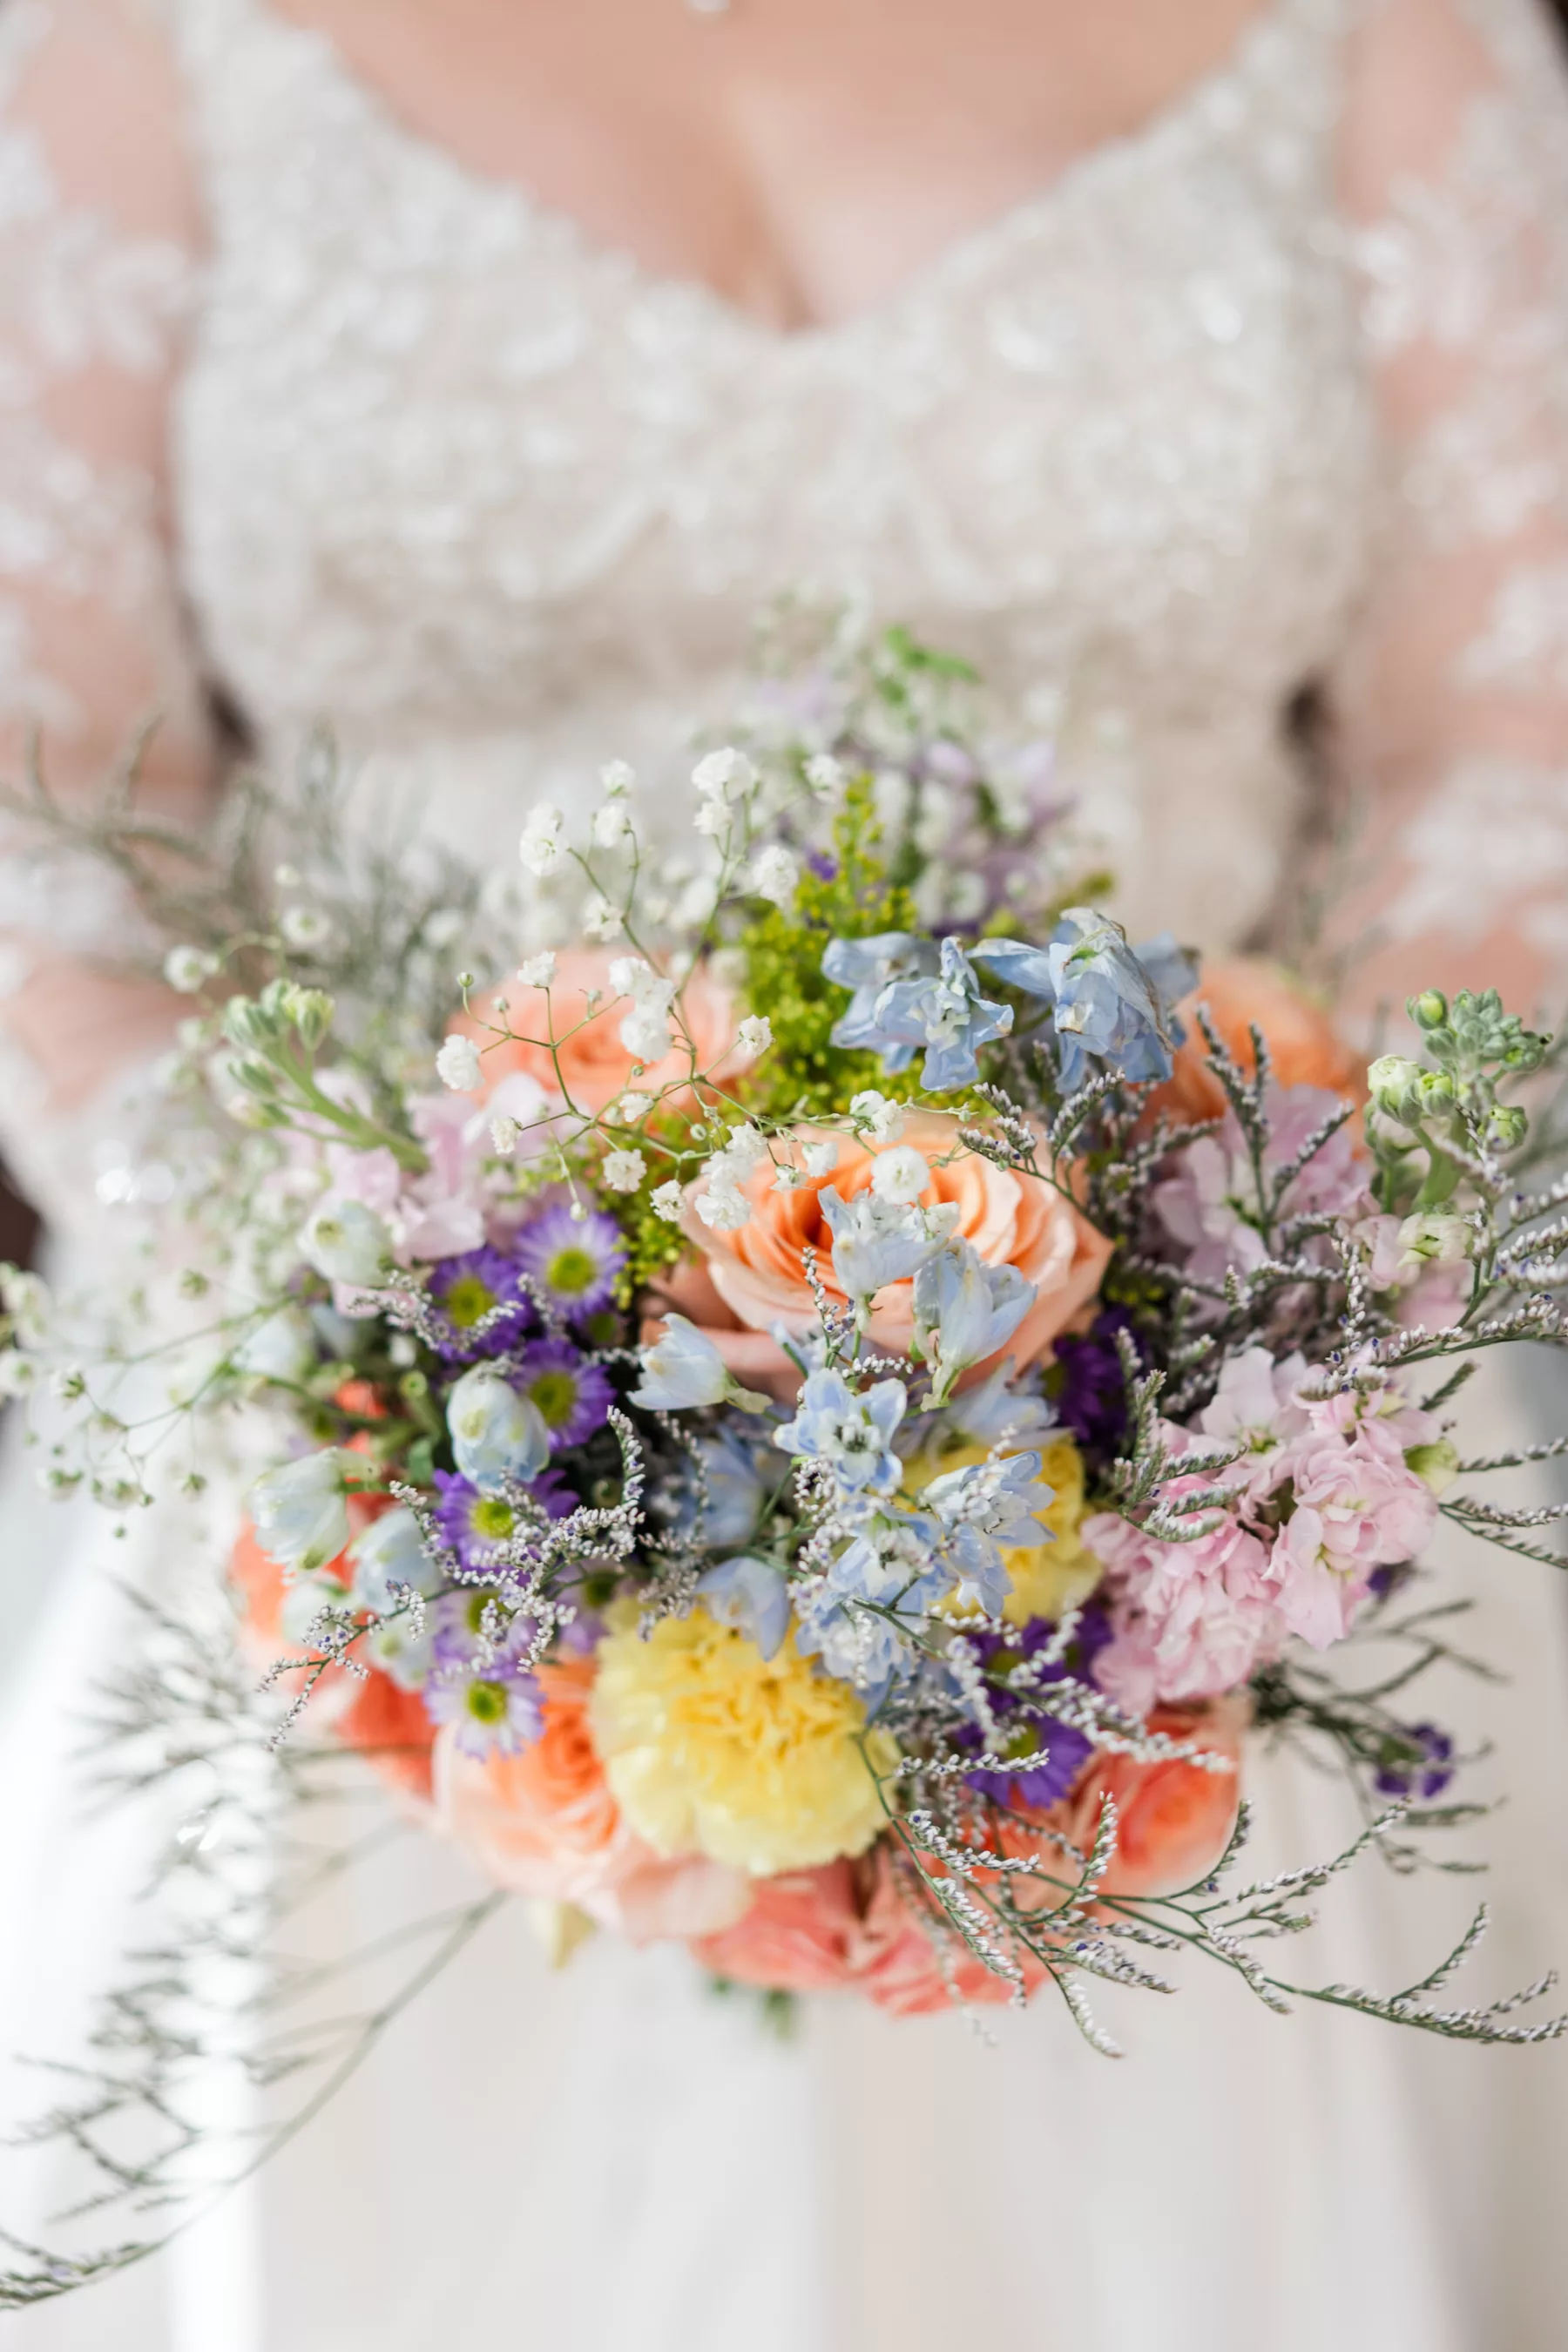 Whimsical Colorful Spring Wedding Bouquet Ideas | Peach Roses, Yellow Carnations, Blue Stock Flowers, and Greenery Floral Arrangement |